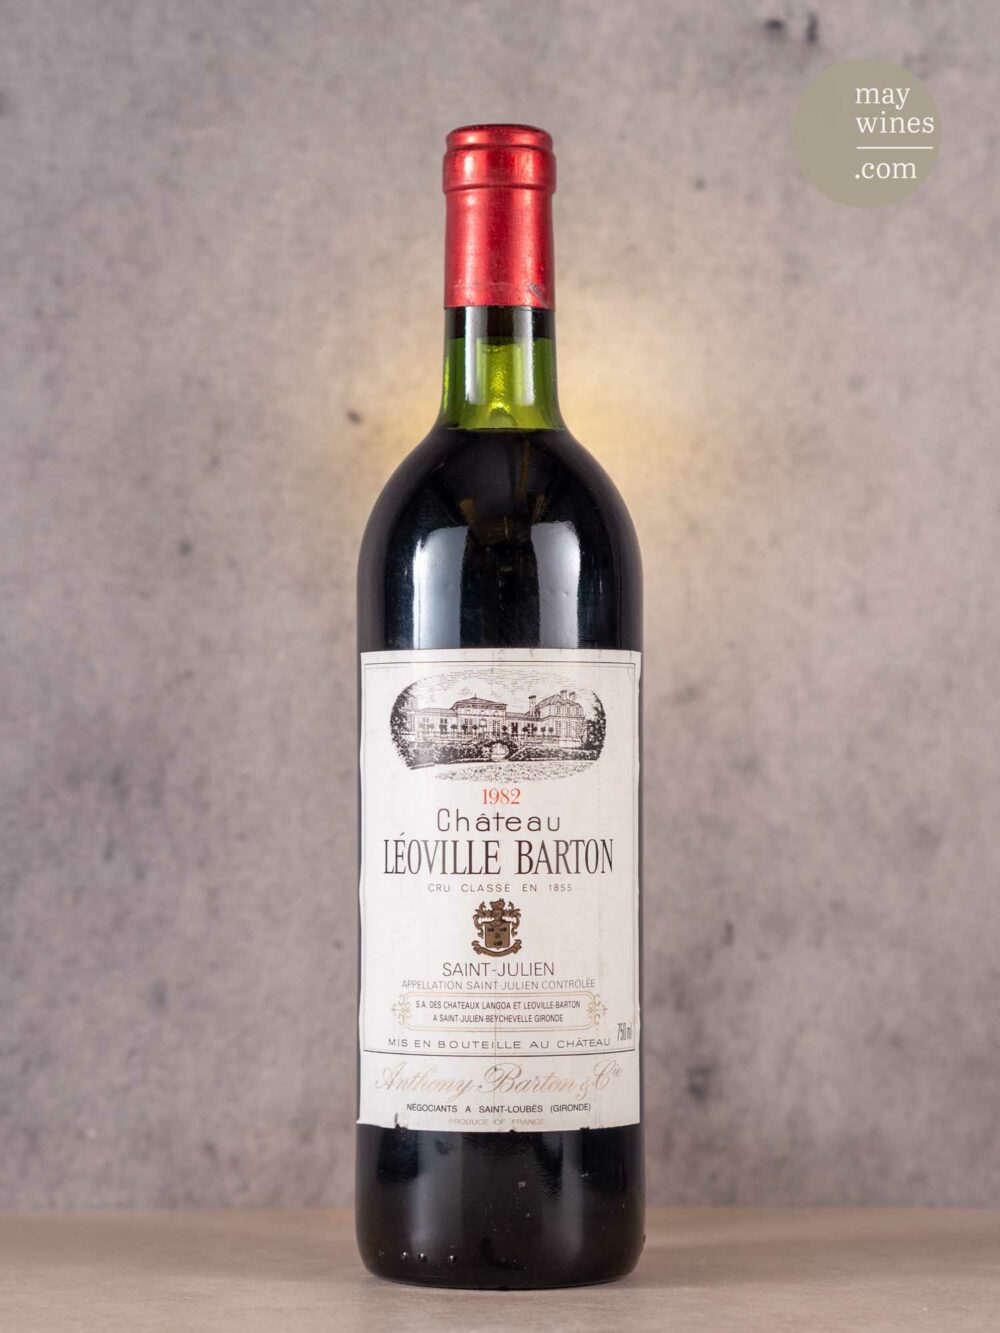 May Wines – Rotwein – 1982 Château Léoville Barton